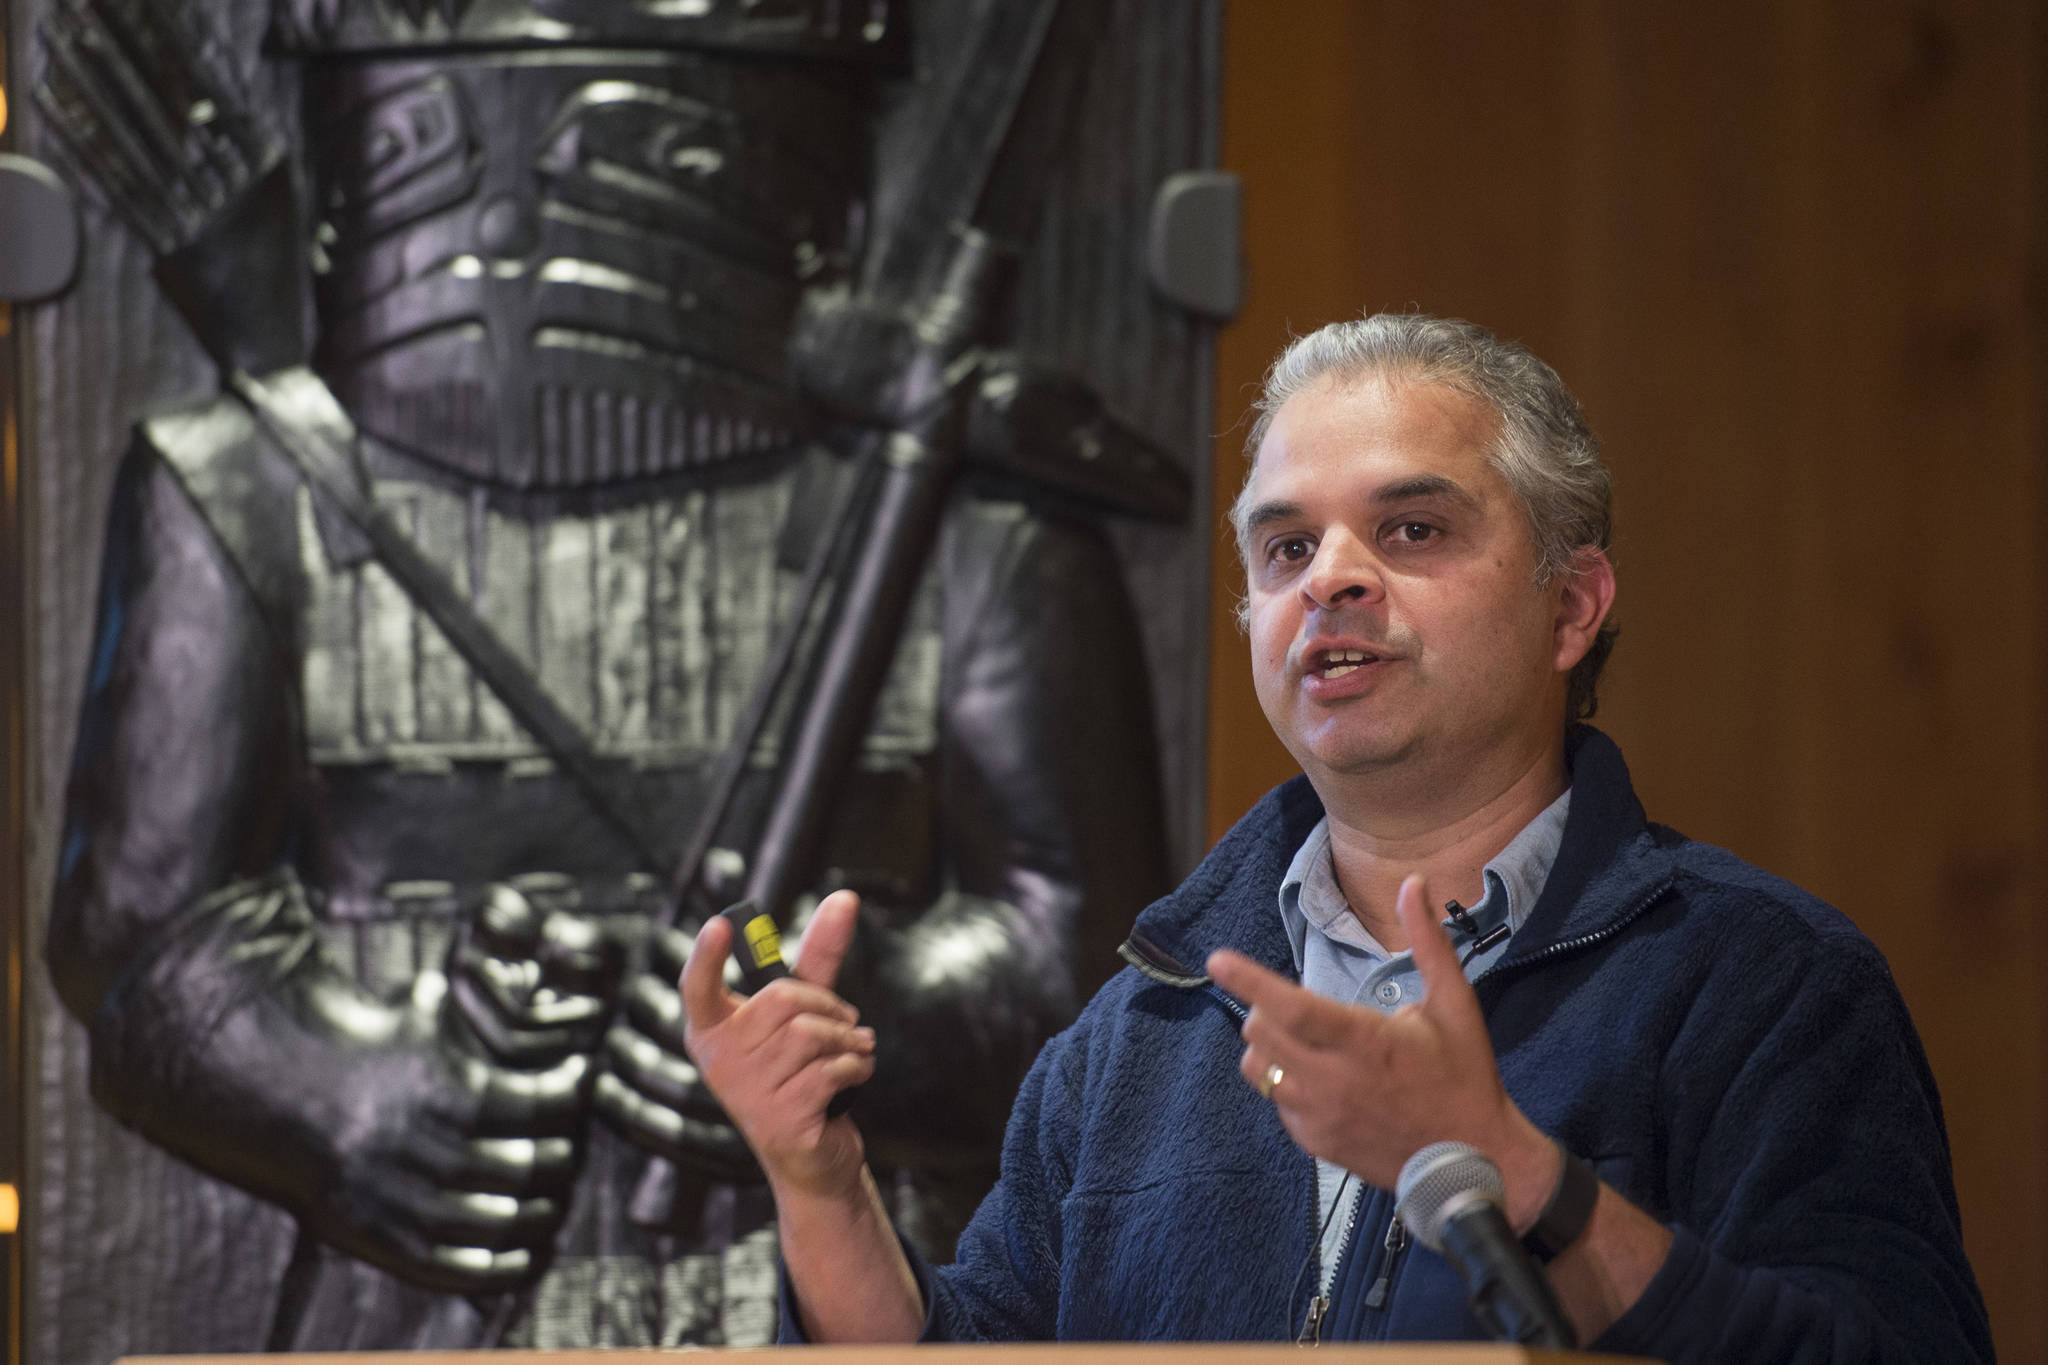 Ripan S. Malhi, Ph.D., speaks at the Walter Soboleff Center on Thursday, Nov. 8, 2018. Malhi is a Richard and Margaret Romano Professor at the University of Illinois at Urbana-Champaign with affiliations in anthropology, the School of Integrative Biology, and the Carl R. Woese Institute for Genomic Biology. The lecture is part of Sealaska Heritage Institute’s events in recognition of Native American Heritage Month. (Michael Penn | Juneau Empire)